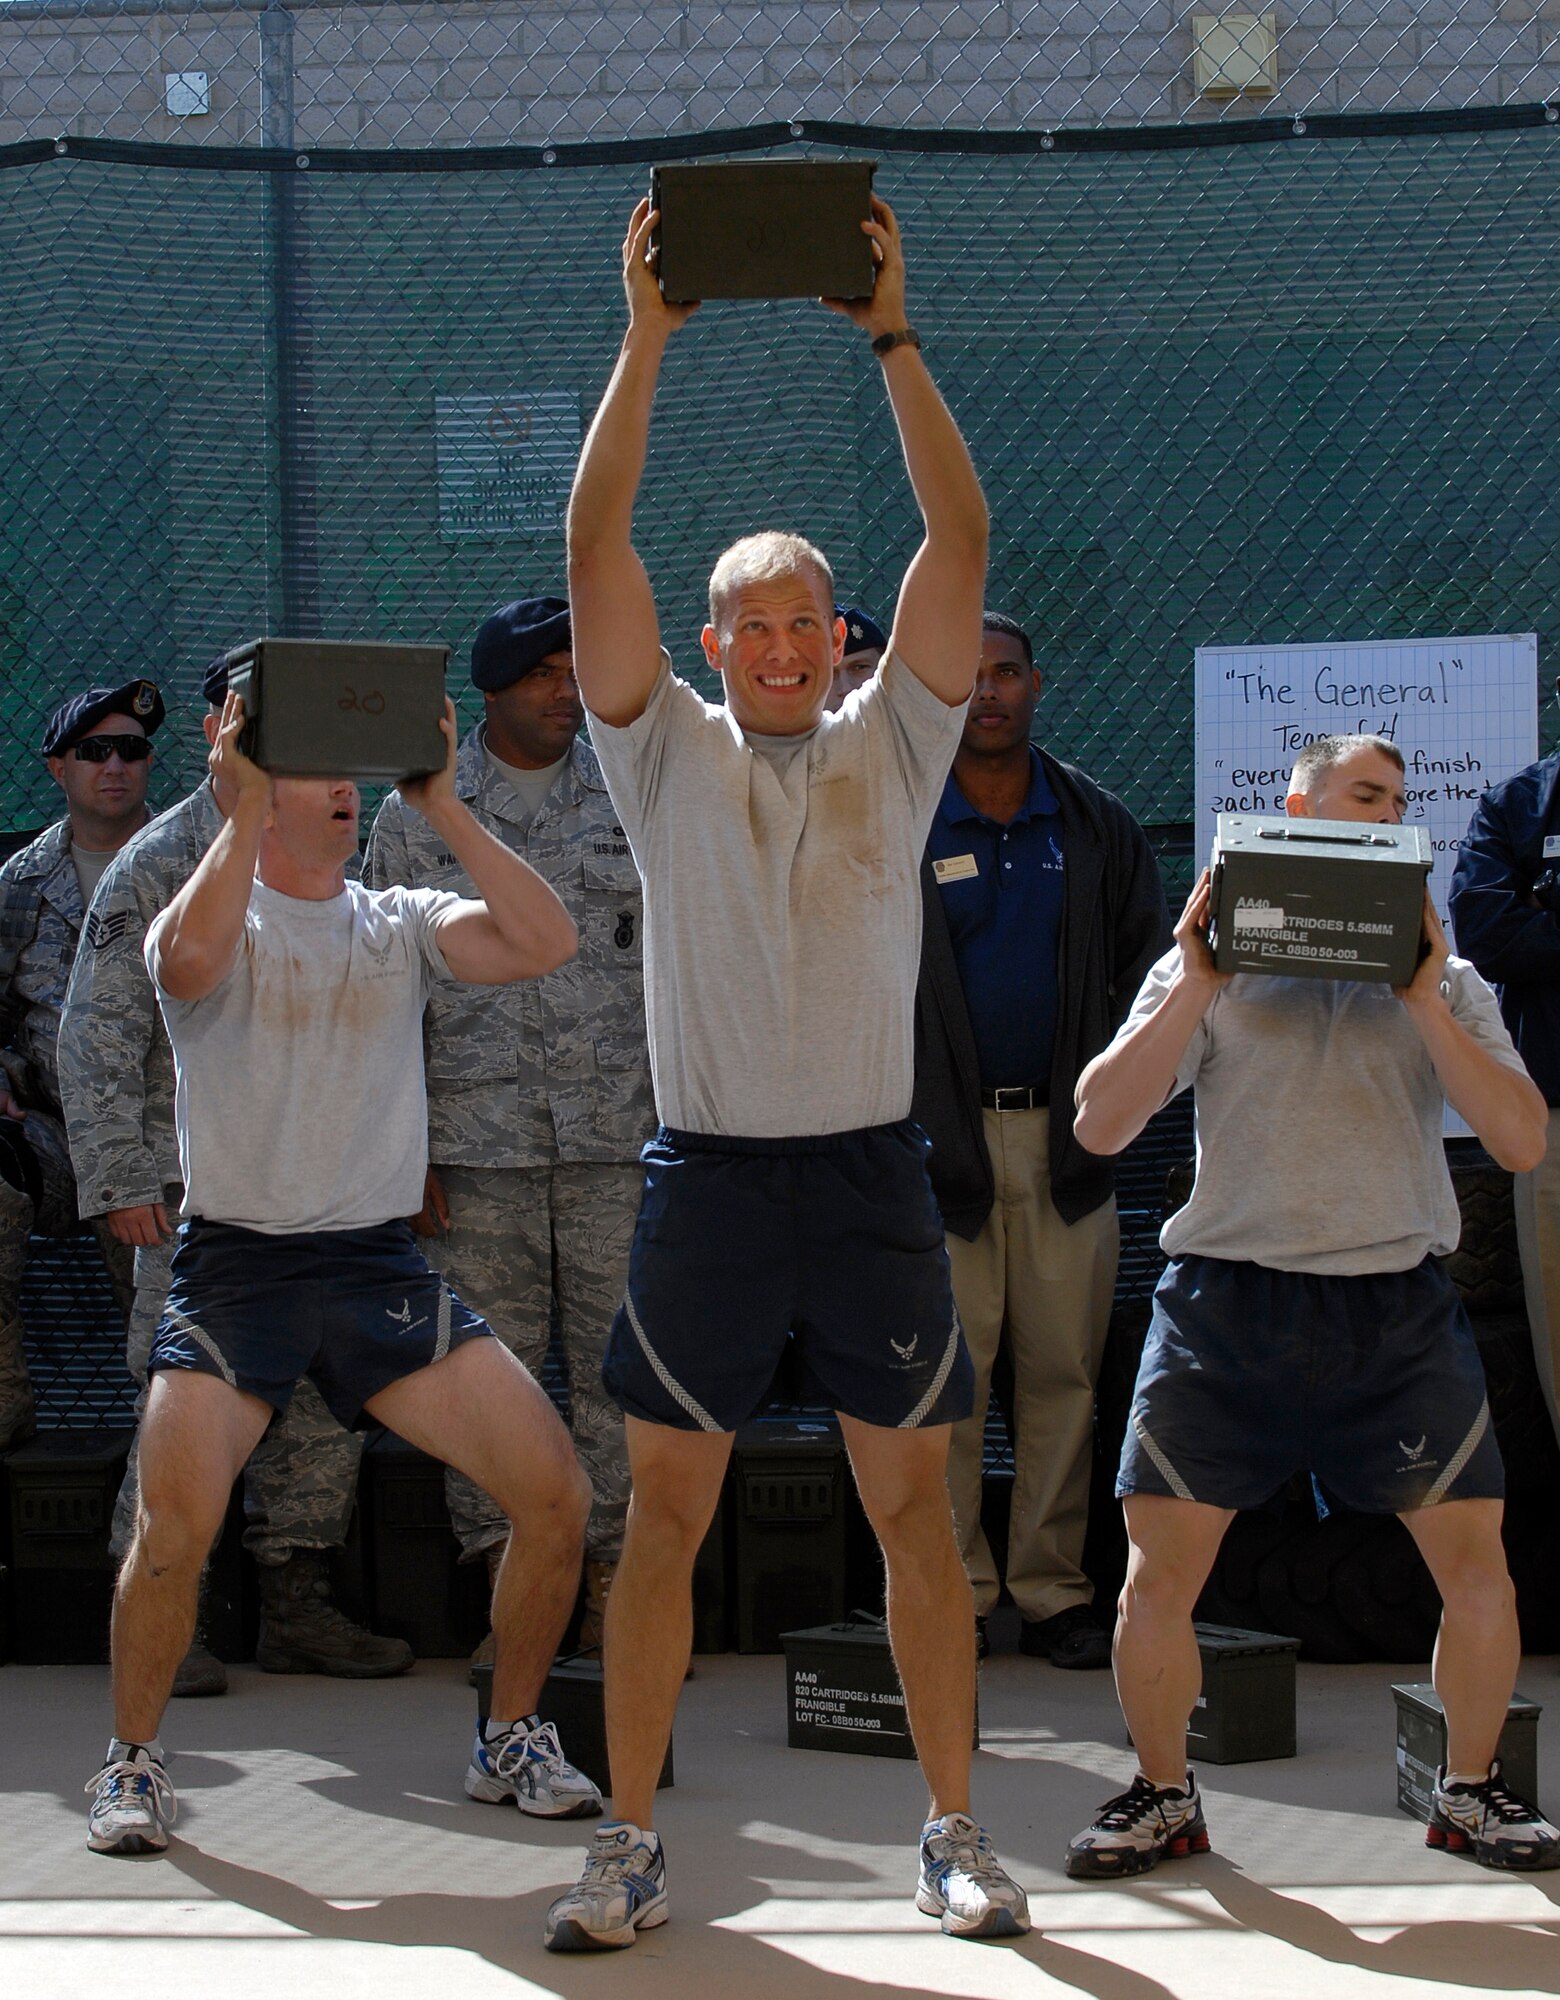 Members of the 56th Security Forces Squadron perform overhead presses with weighted ammo-cans during a demonstration run through the new Combat PT Course on Luke Air Force Base, Ariz.  (U.S. Air Force photo by Tech. Sgt. Jeffrey A. Wolfe)